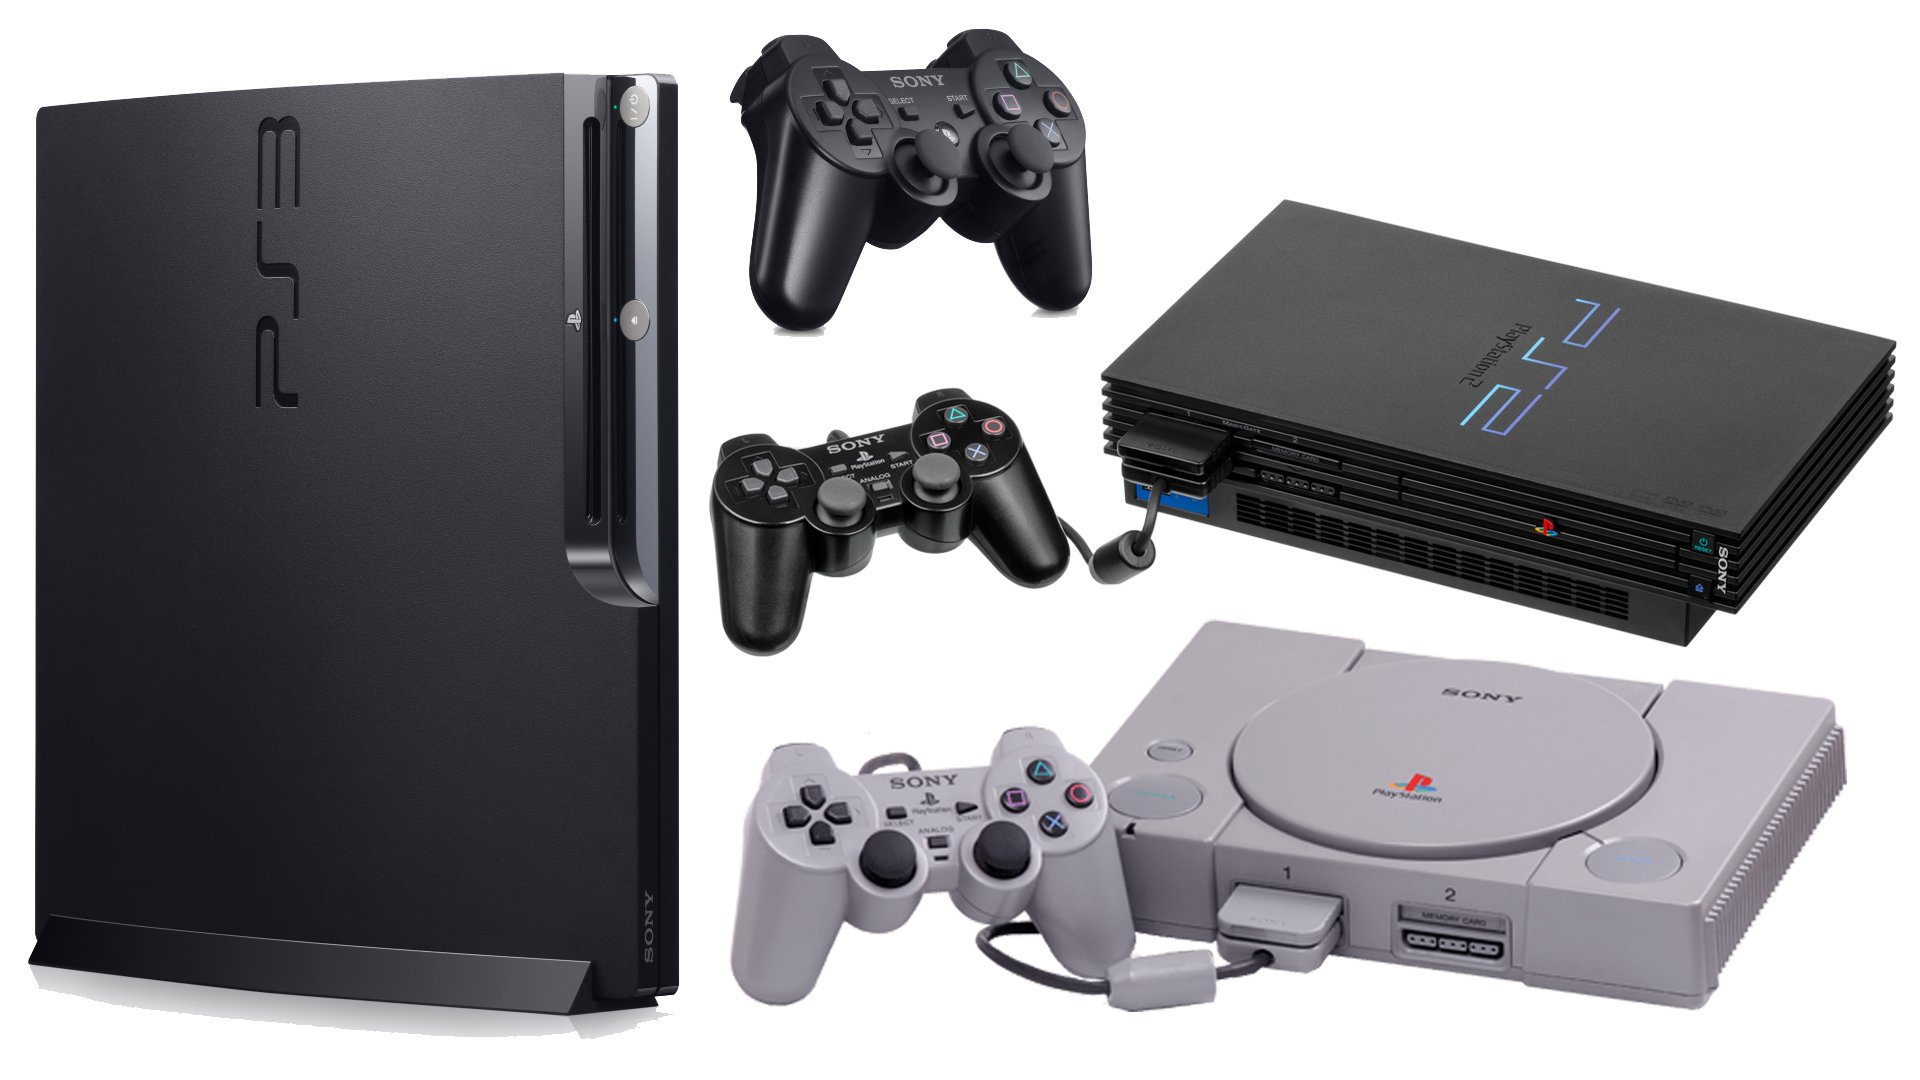 PS5 could be backwards compatible with PS1, PS2 and PS3